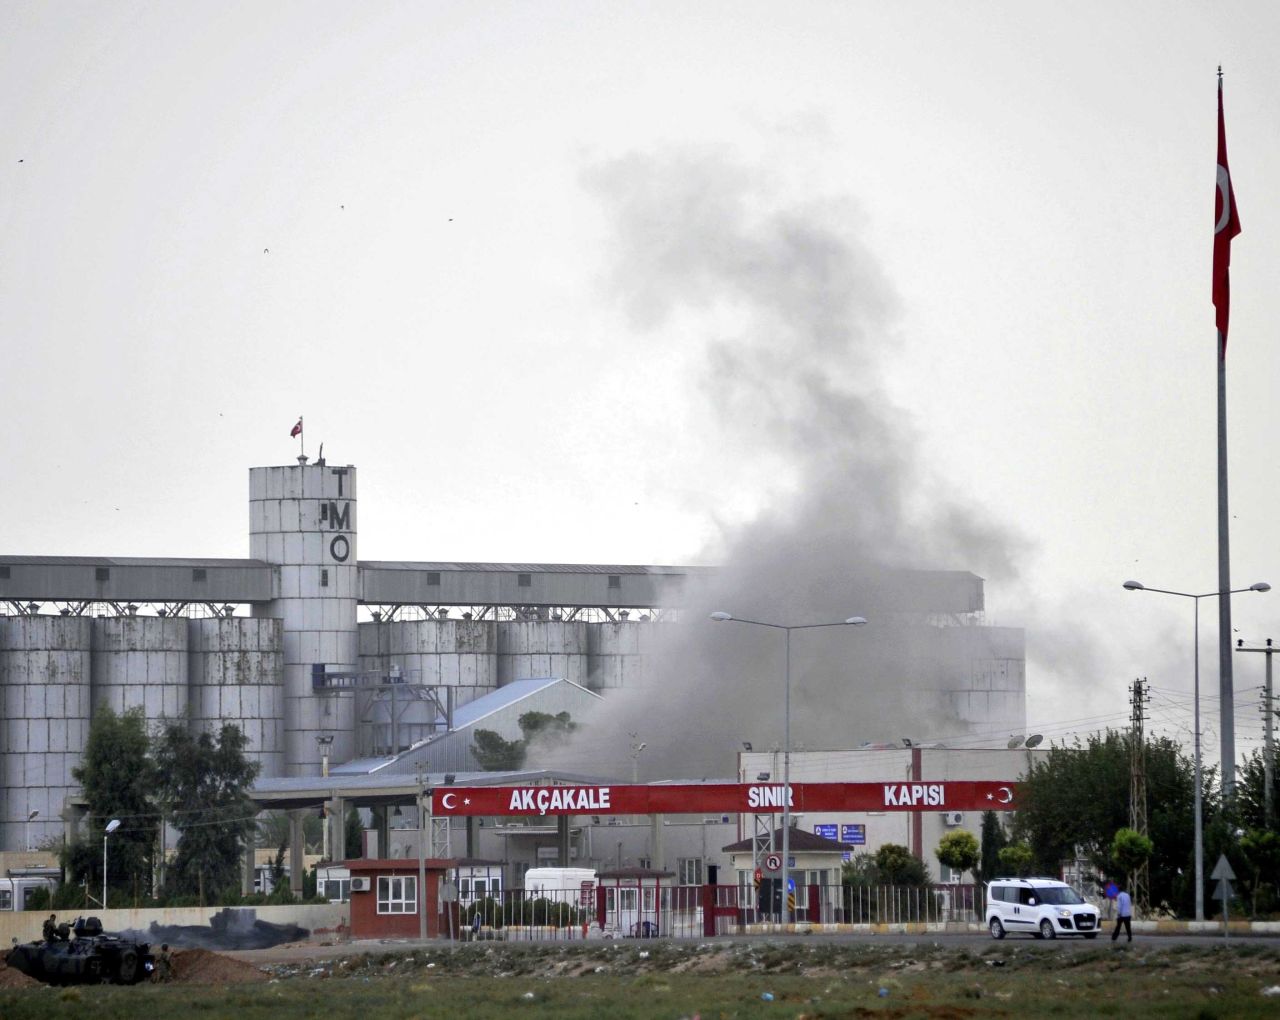 Smoke rises at a border gate in  Akcakale, Turkey, near the Syrian border on Sunday, October 7, after a shell fired from Syria. Turkey fired on Syrian government targets in response. No was injured in Sunday's shelling, a witness said. Akcakale is the same town where five Turks were killed last week in another cross-border incident. <a href="http://www.cnn.com/2012/07/16/middleeast/gallery/syria-unrest/index.html" target="_blank">See photos of Syria's internal violence.</a>